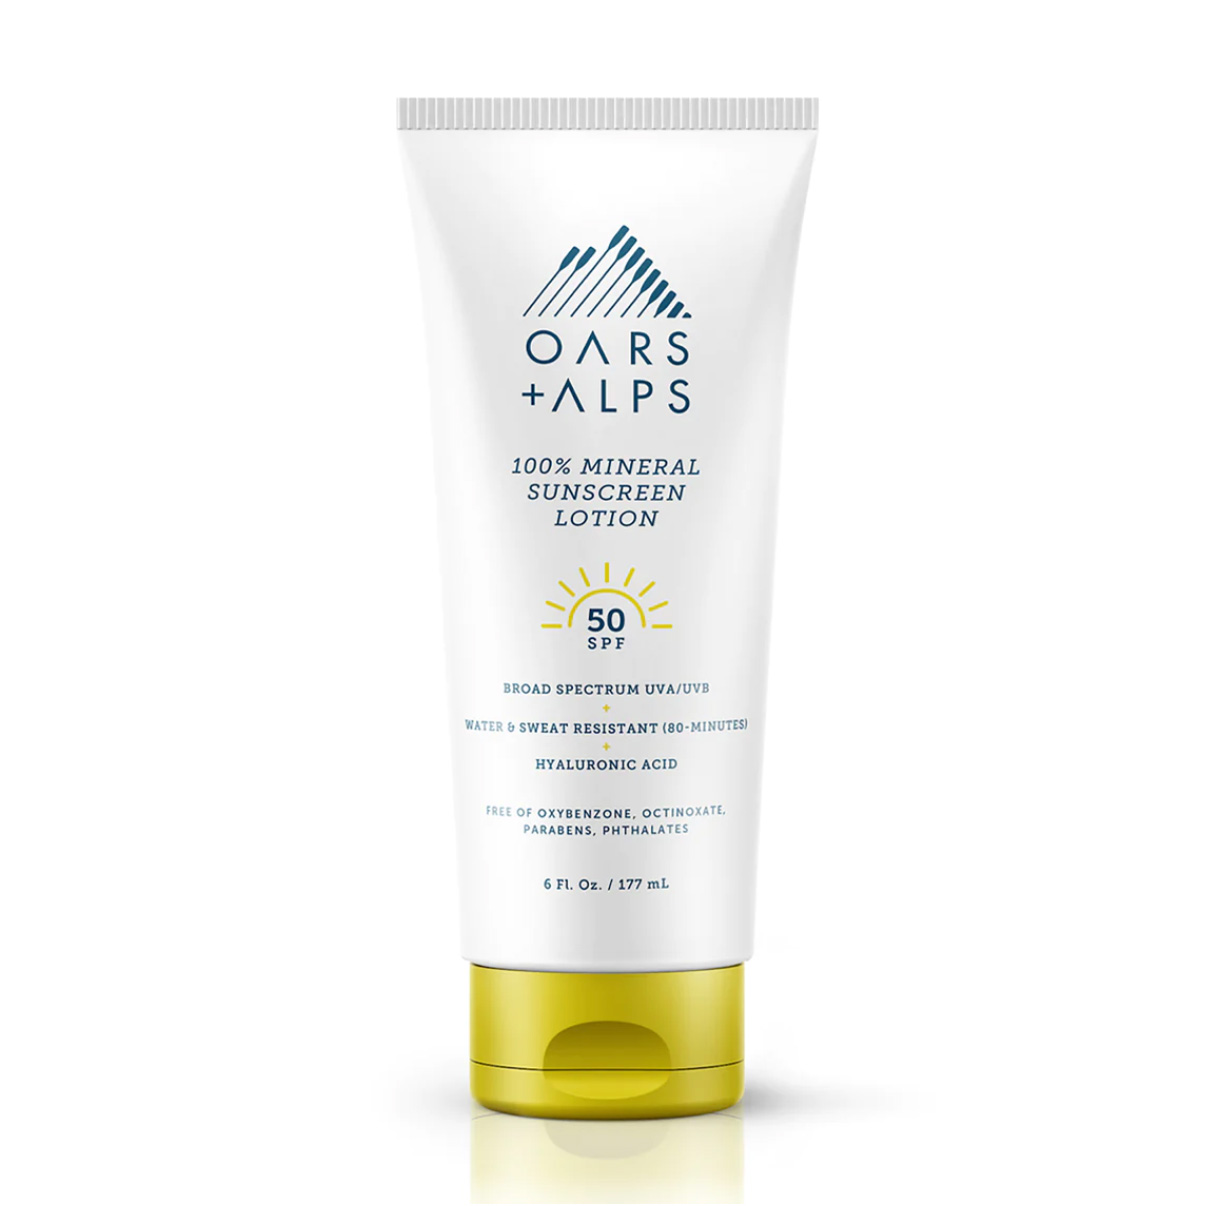 Oars + Alps 100% Mineral Sunscreen Lotion with SPF 50